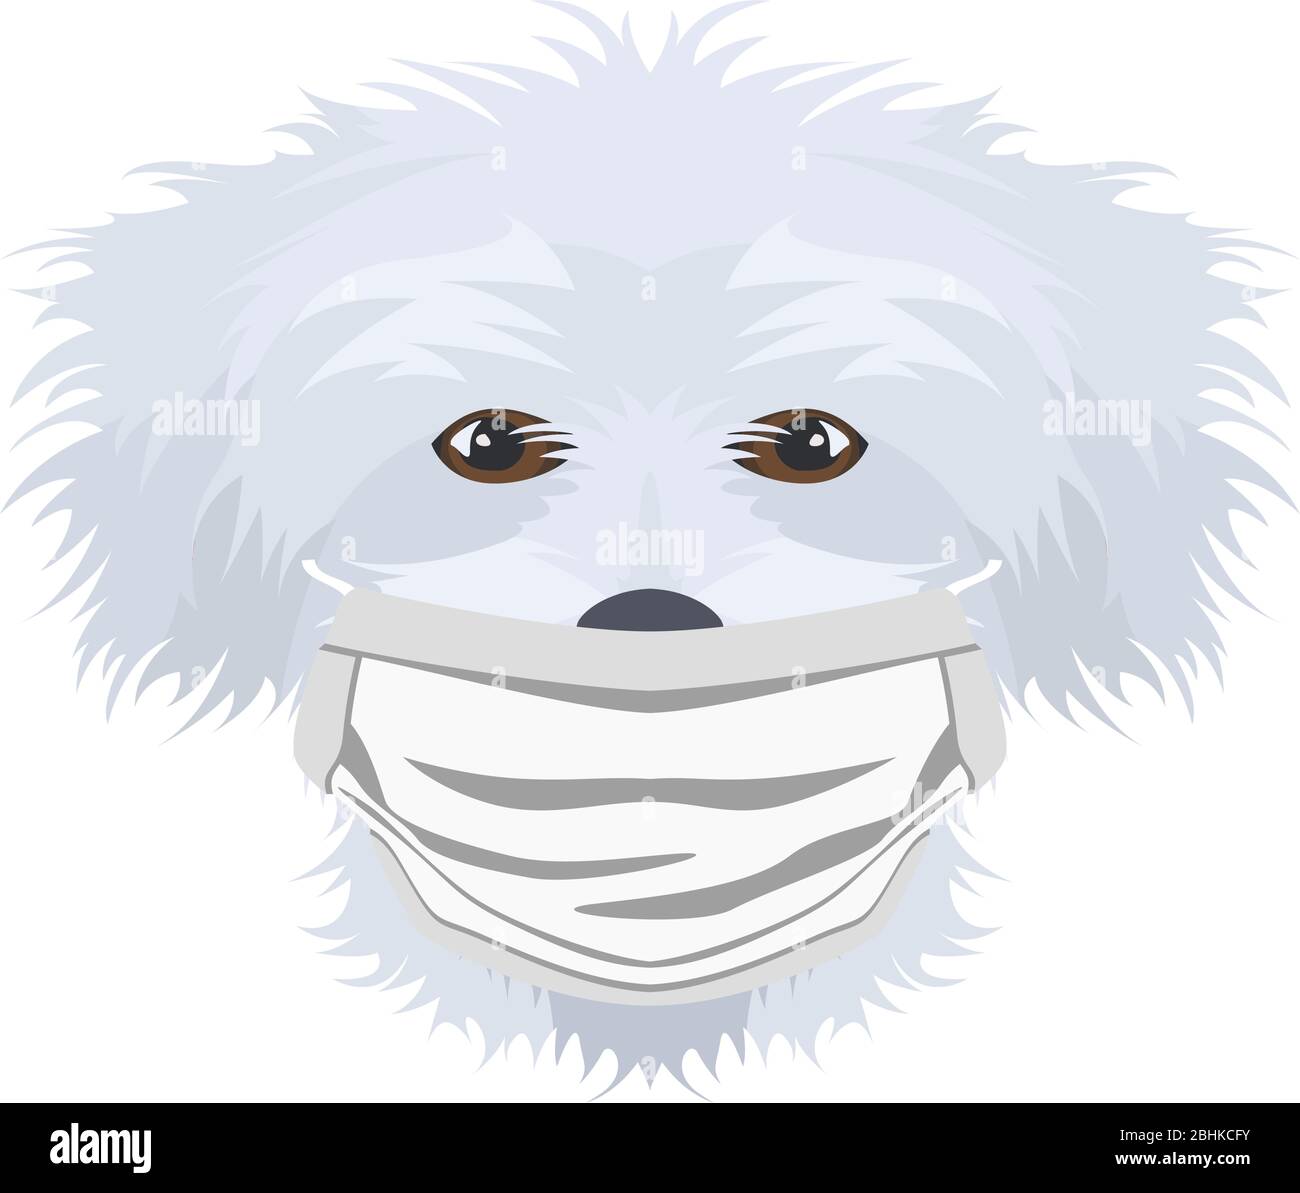 Illustration of a Maltese with a respirator. At this time of the pandemic, the design is a nice graphic for fans of dogs. Stock Vector